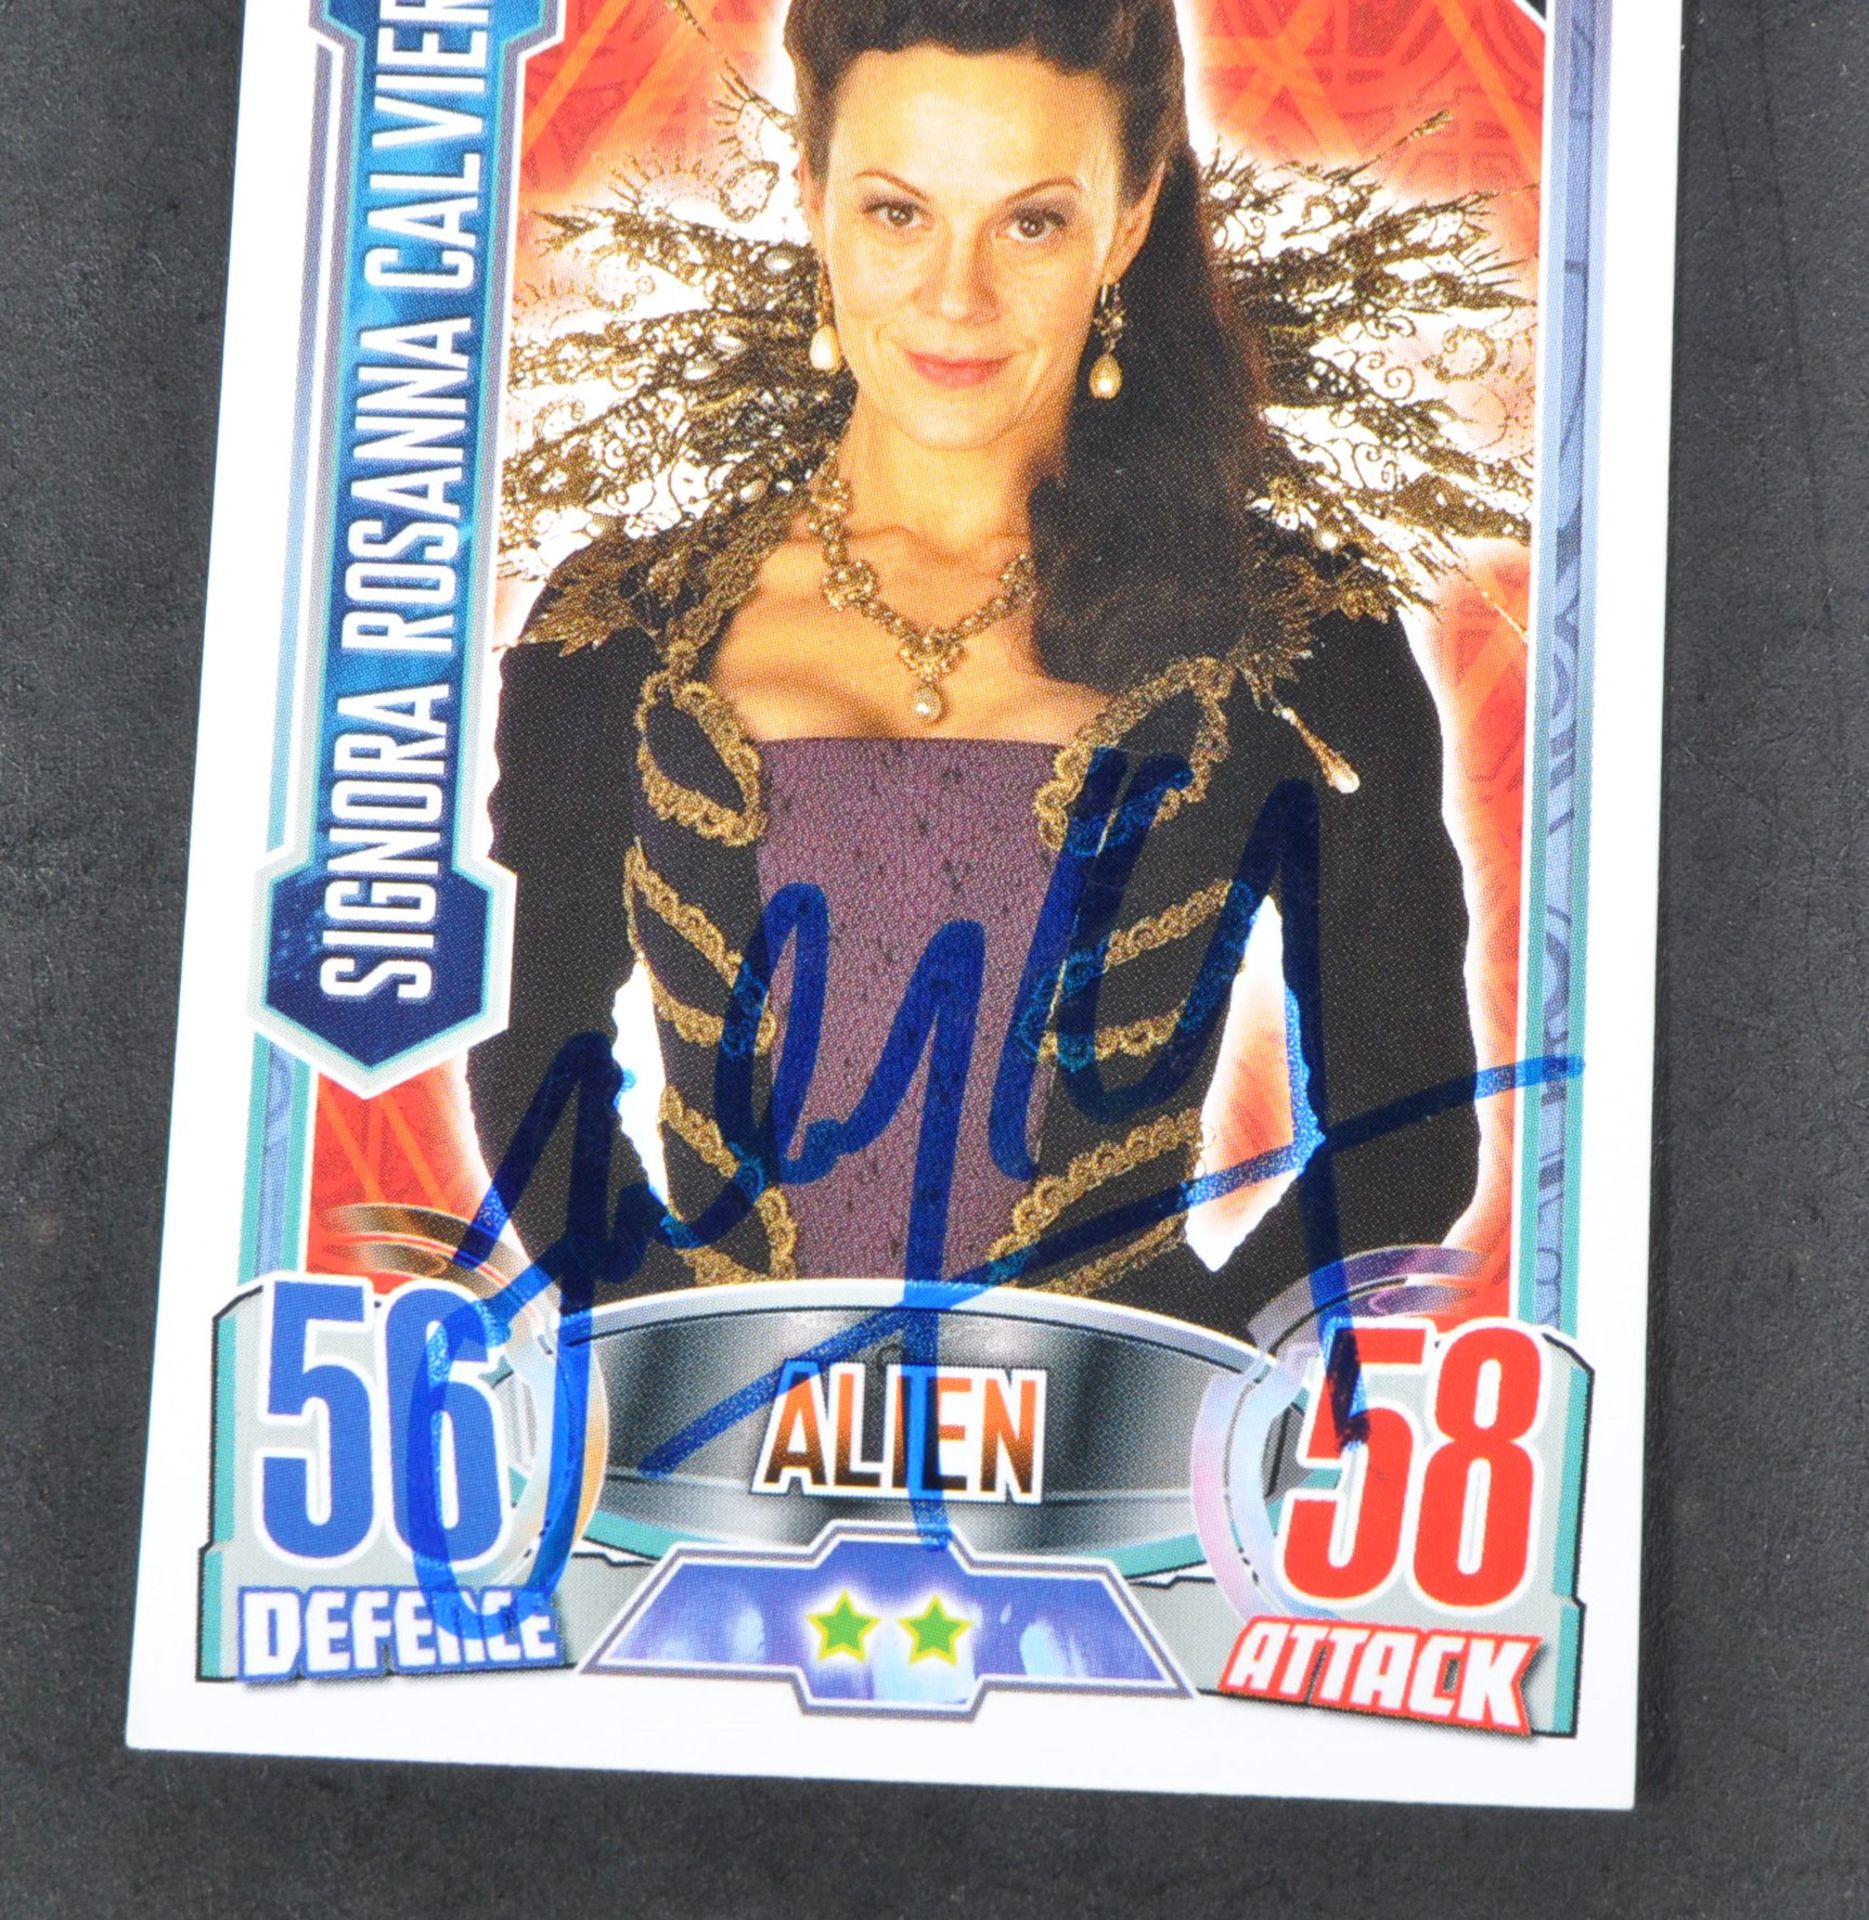 DOCTOR WHO - HELEN MCCRORY (1968-2021) - SIGNED TRADING CARD - Image 2 of 2